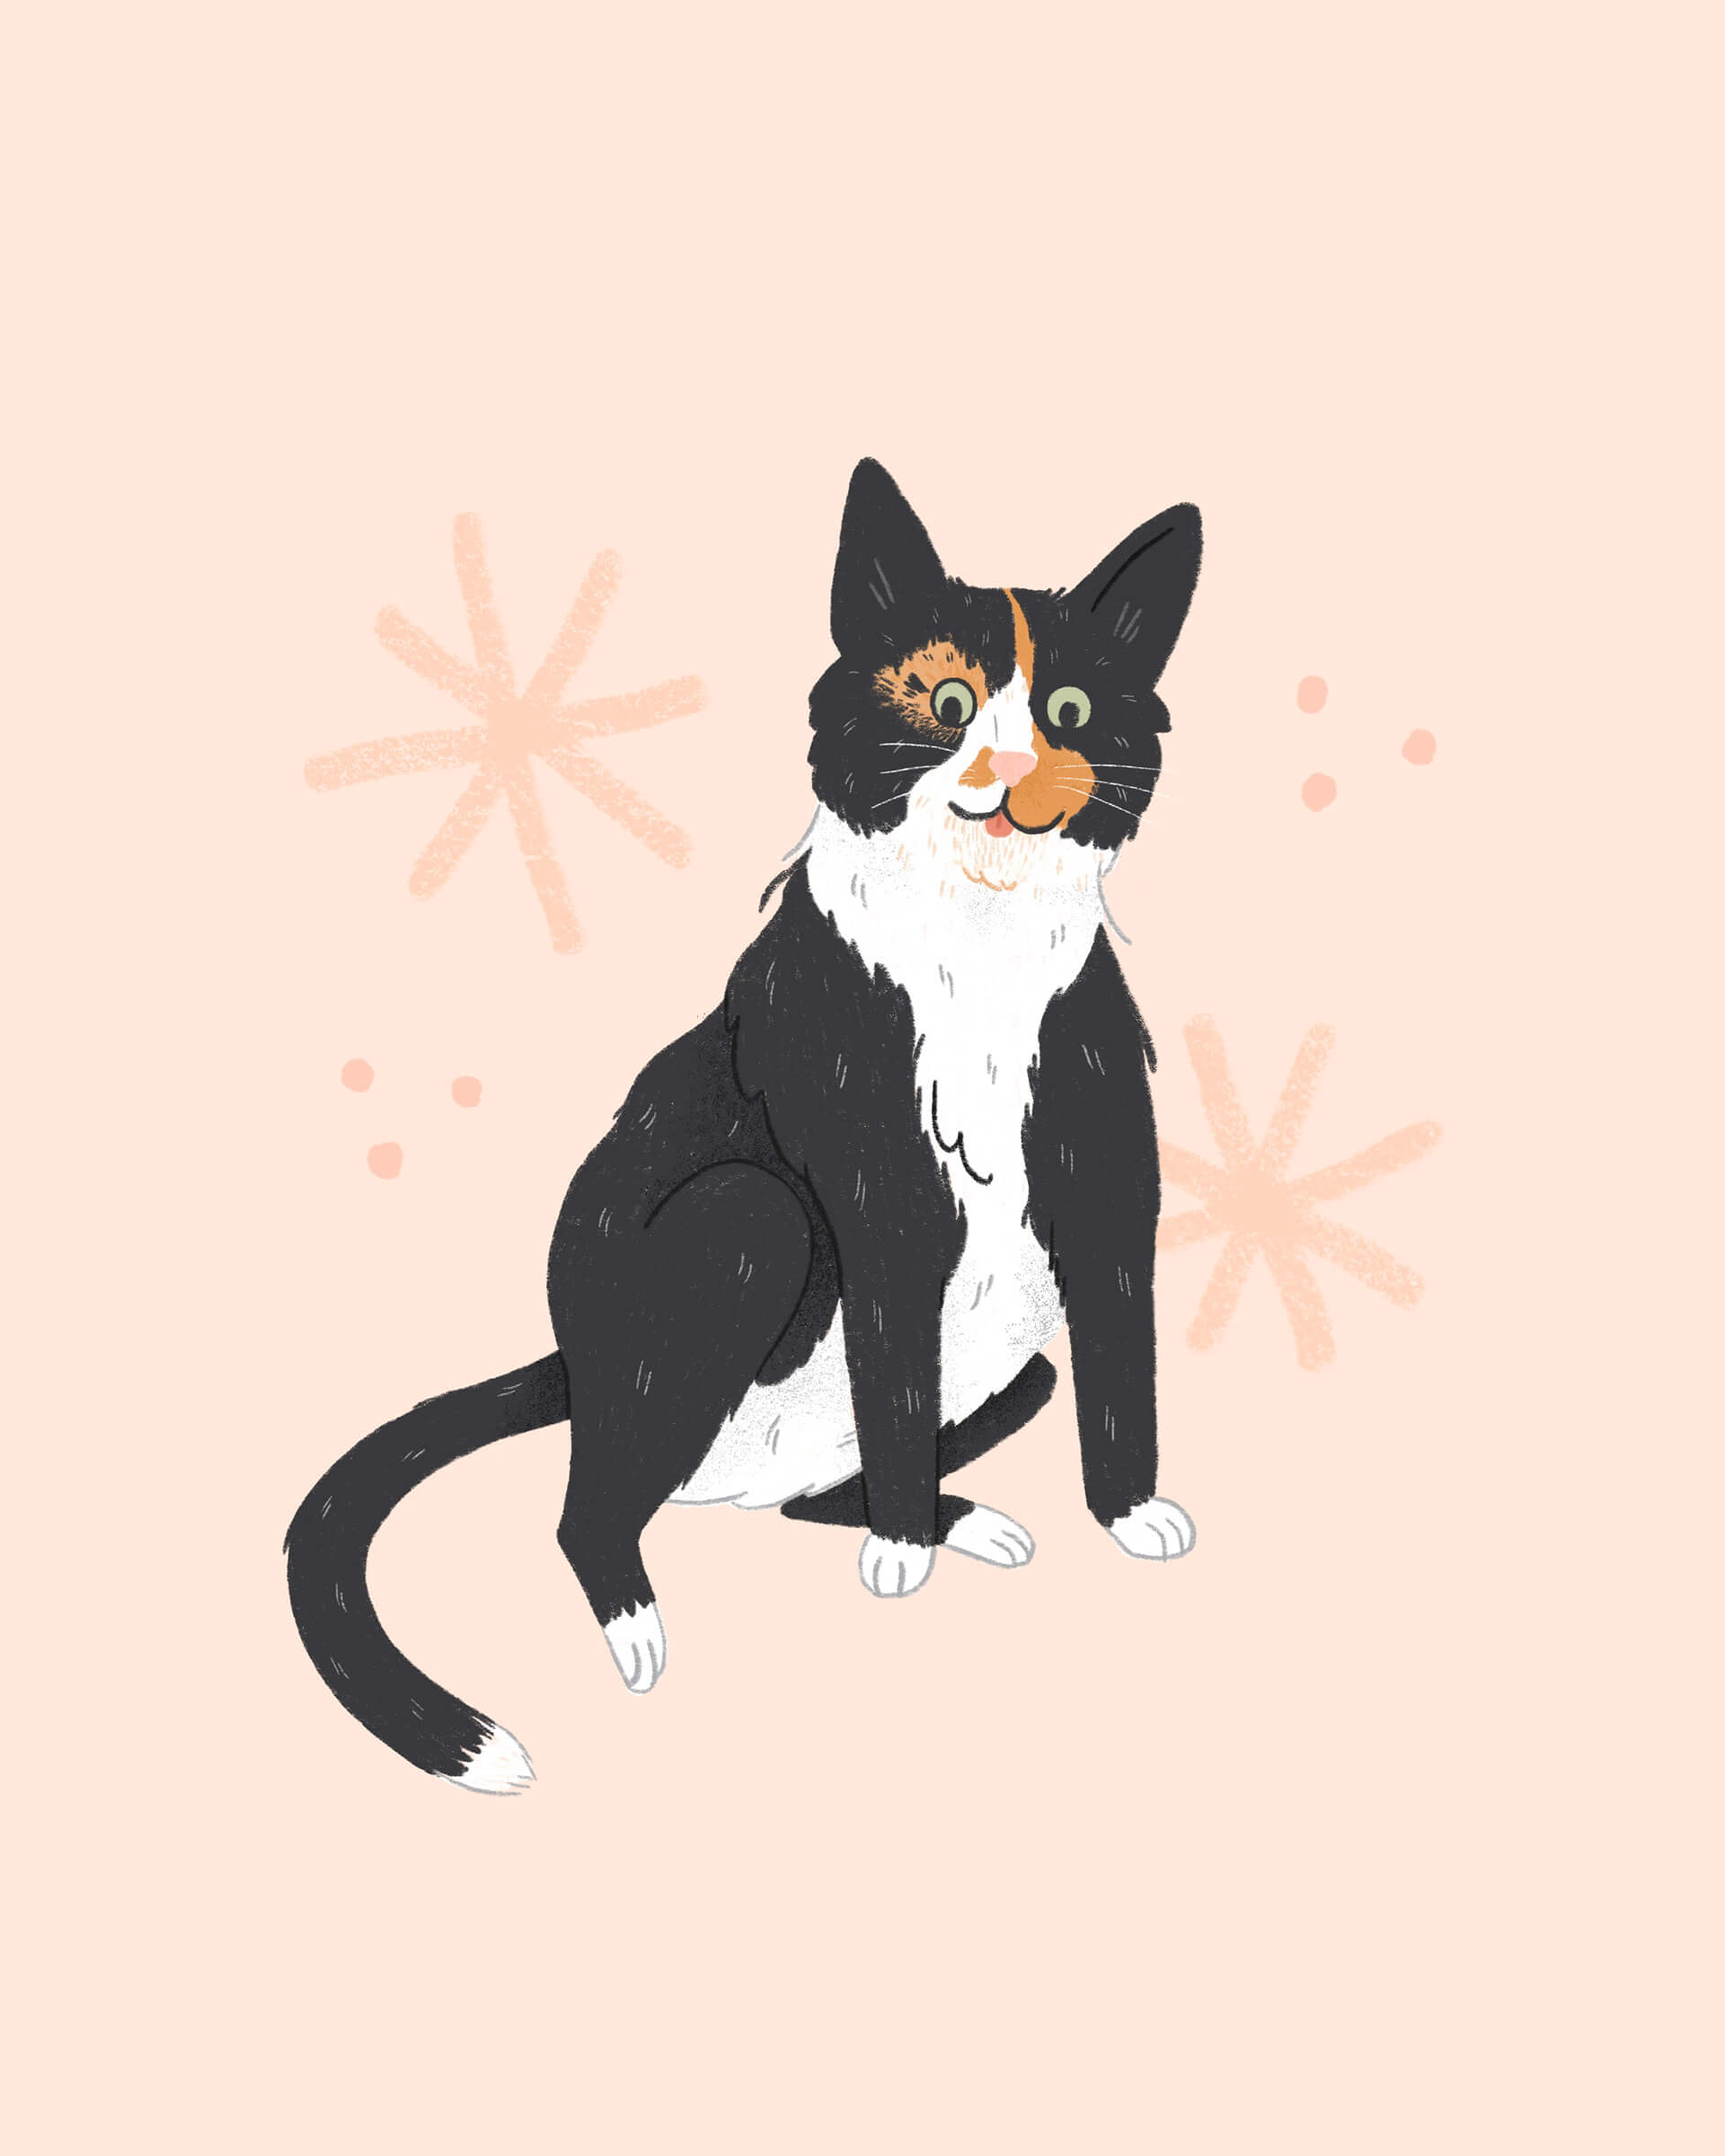 An illustration of a cat doing a side sit on a pink background